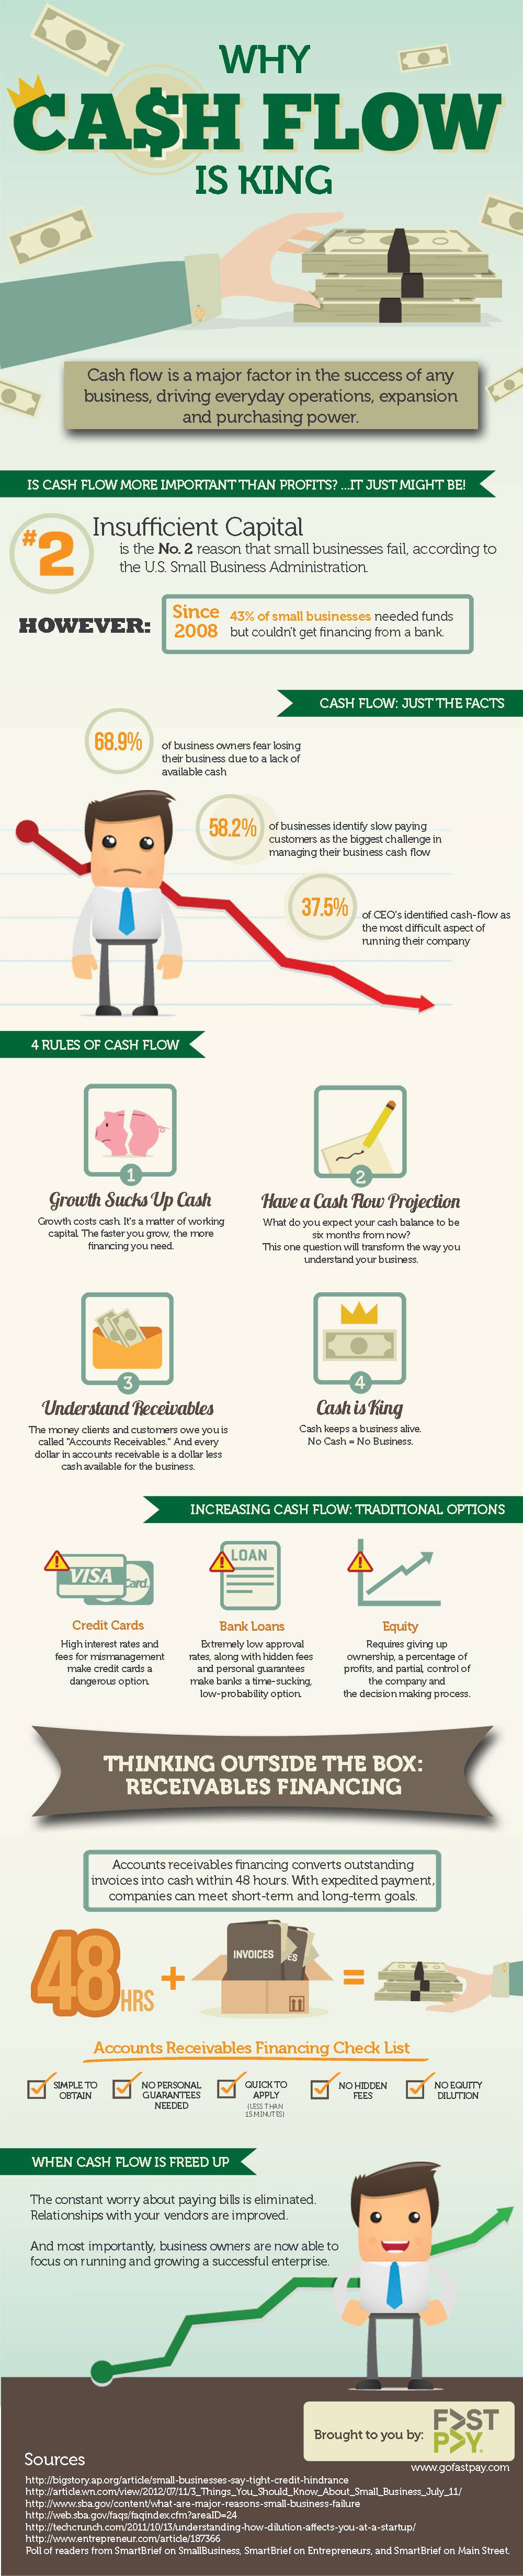 Why Cash Flow is King